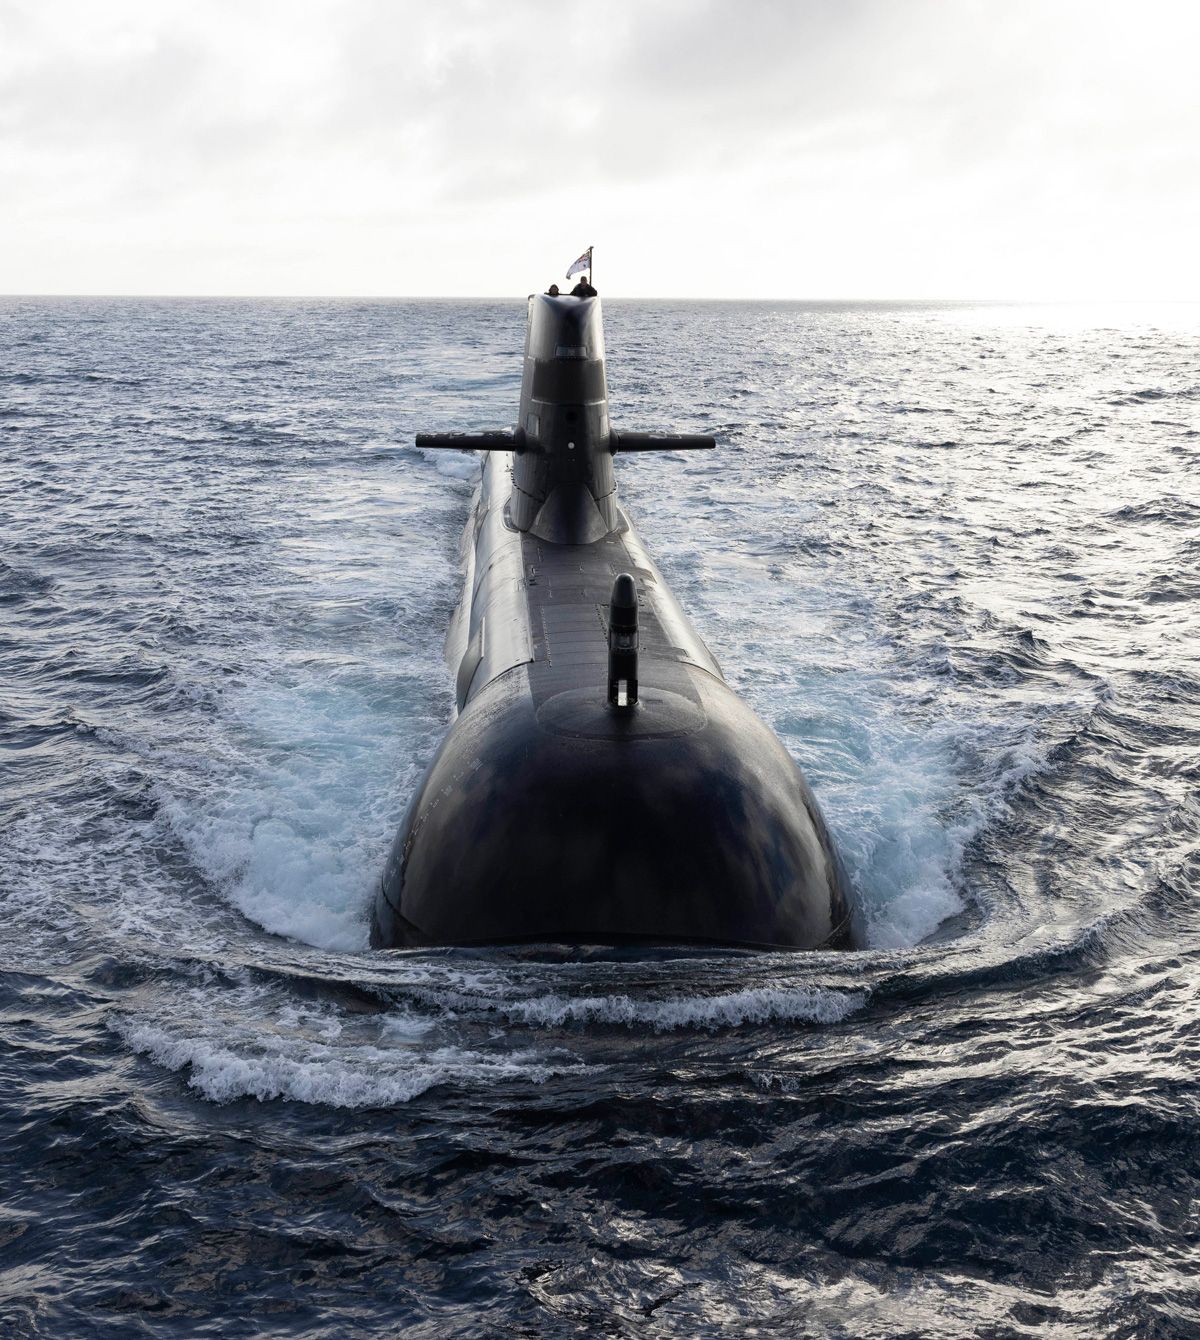 A submarine glides through the water on a sunny day, showcasing its sleek design and underwater capabilities.